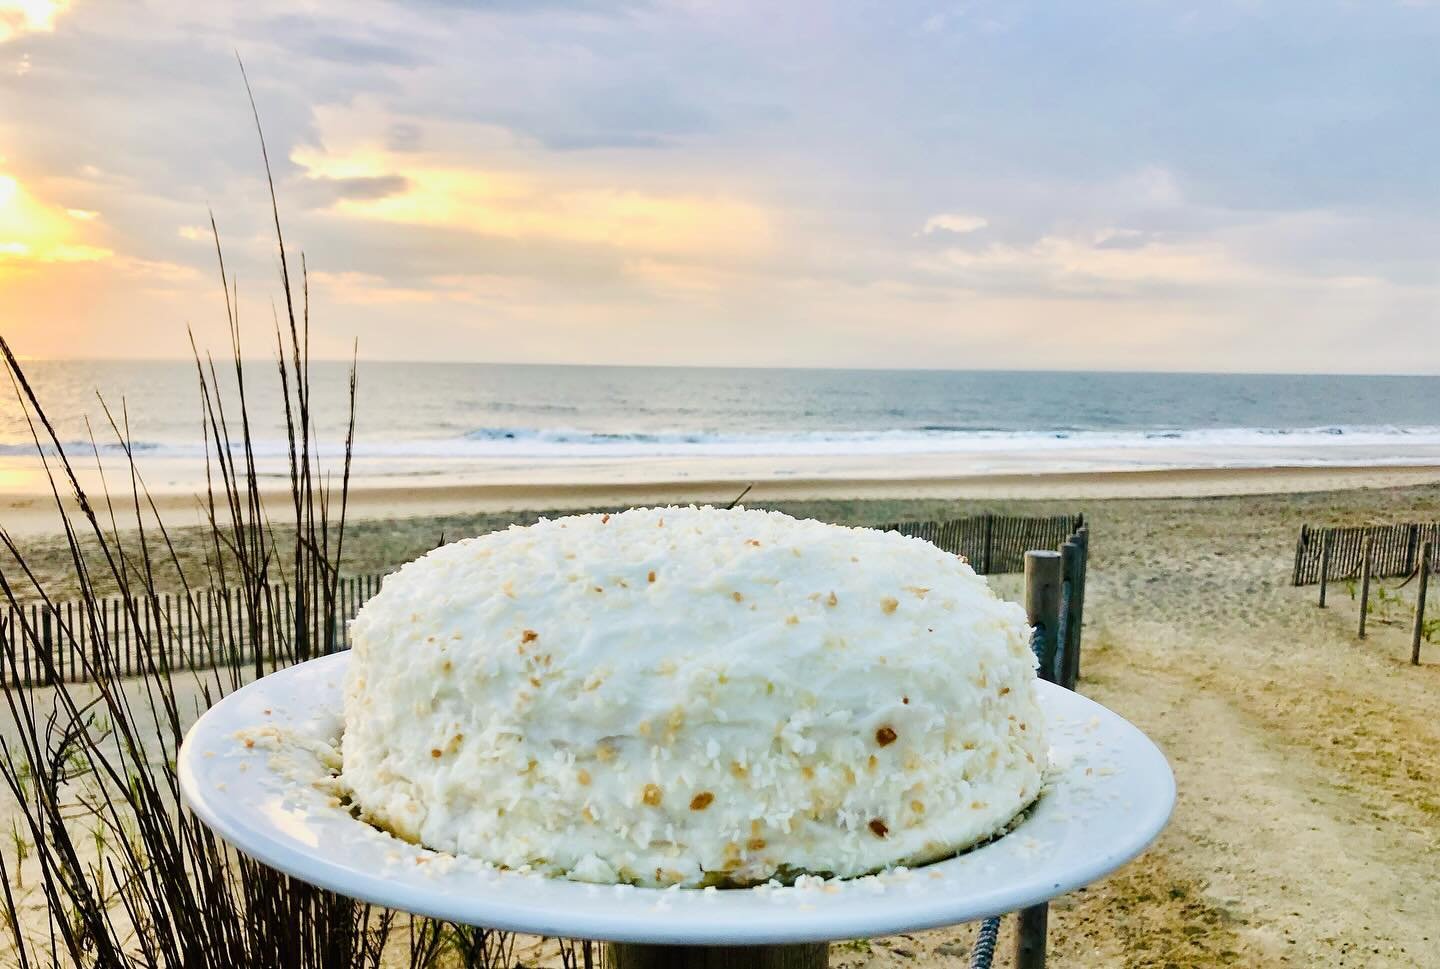 Our famous Pina Colada Coconut Cake. Pineapple Filling and Creamy Coconut Frosting. Made in house. Available for purchase via our website and for pick-up only at Sedona between 5:00pm - 7:00pm. Our address is 26 N Pennsylvania Ave Bethany Beach, DE 1